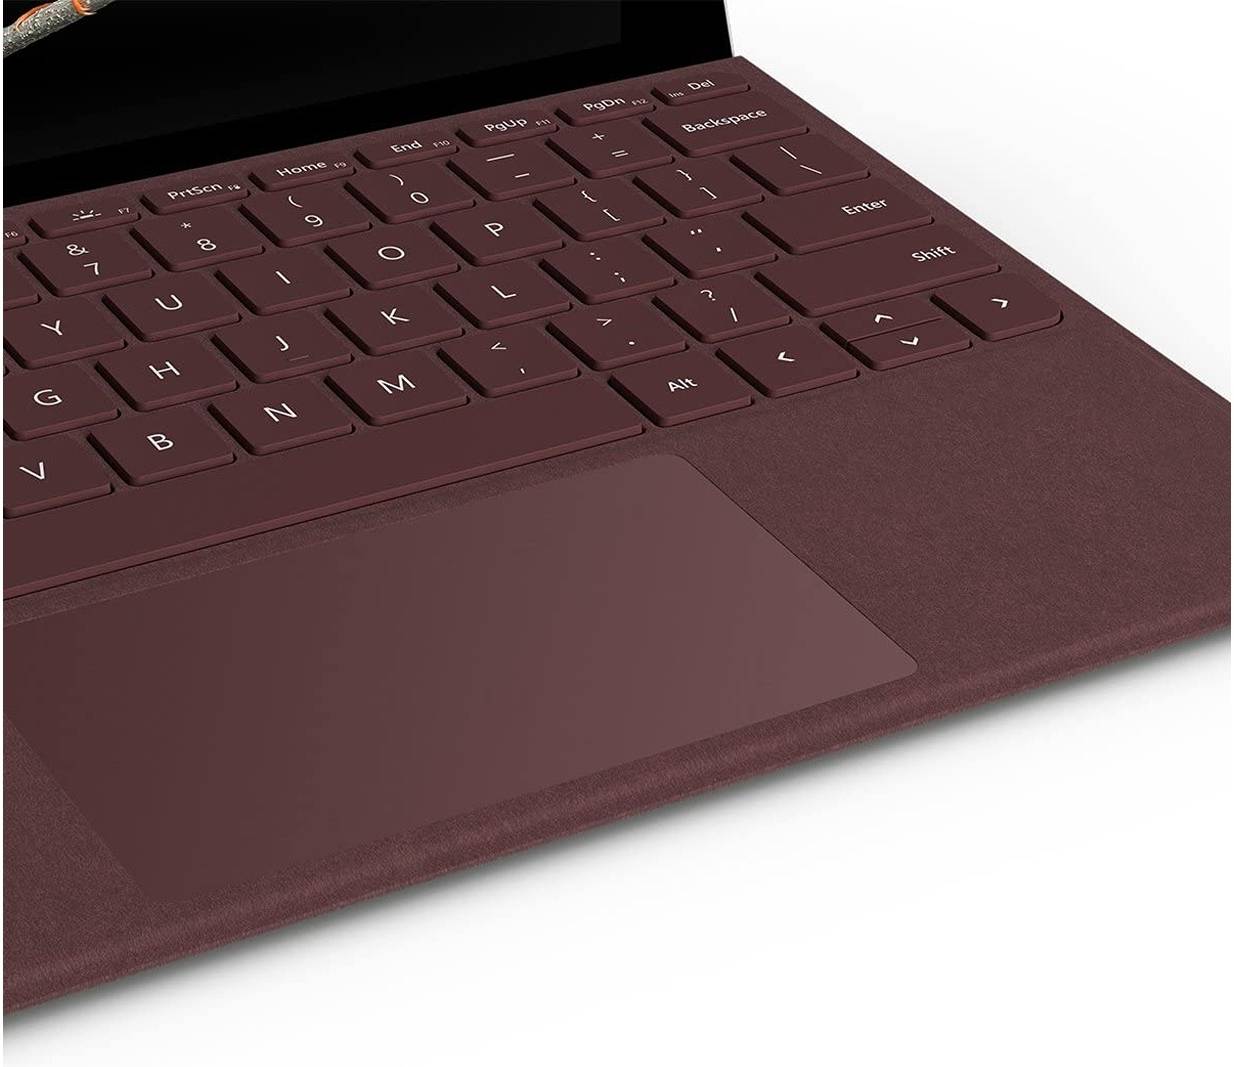 Microsoft Surface Go Type Cover, Poppy Red KSC-00097